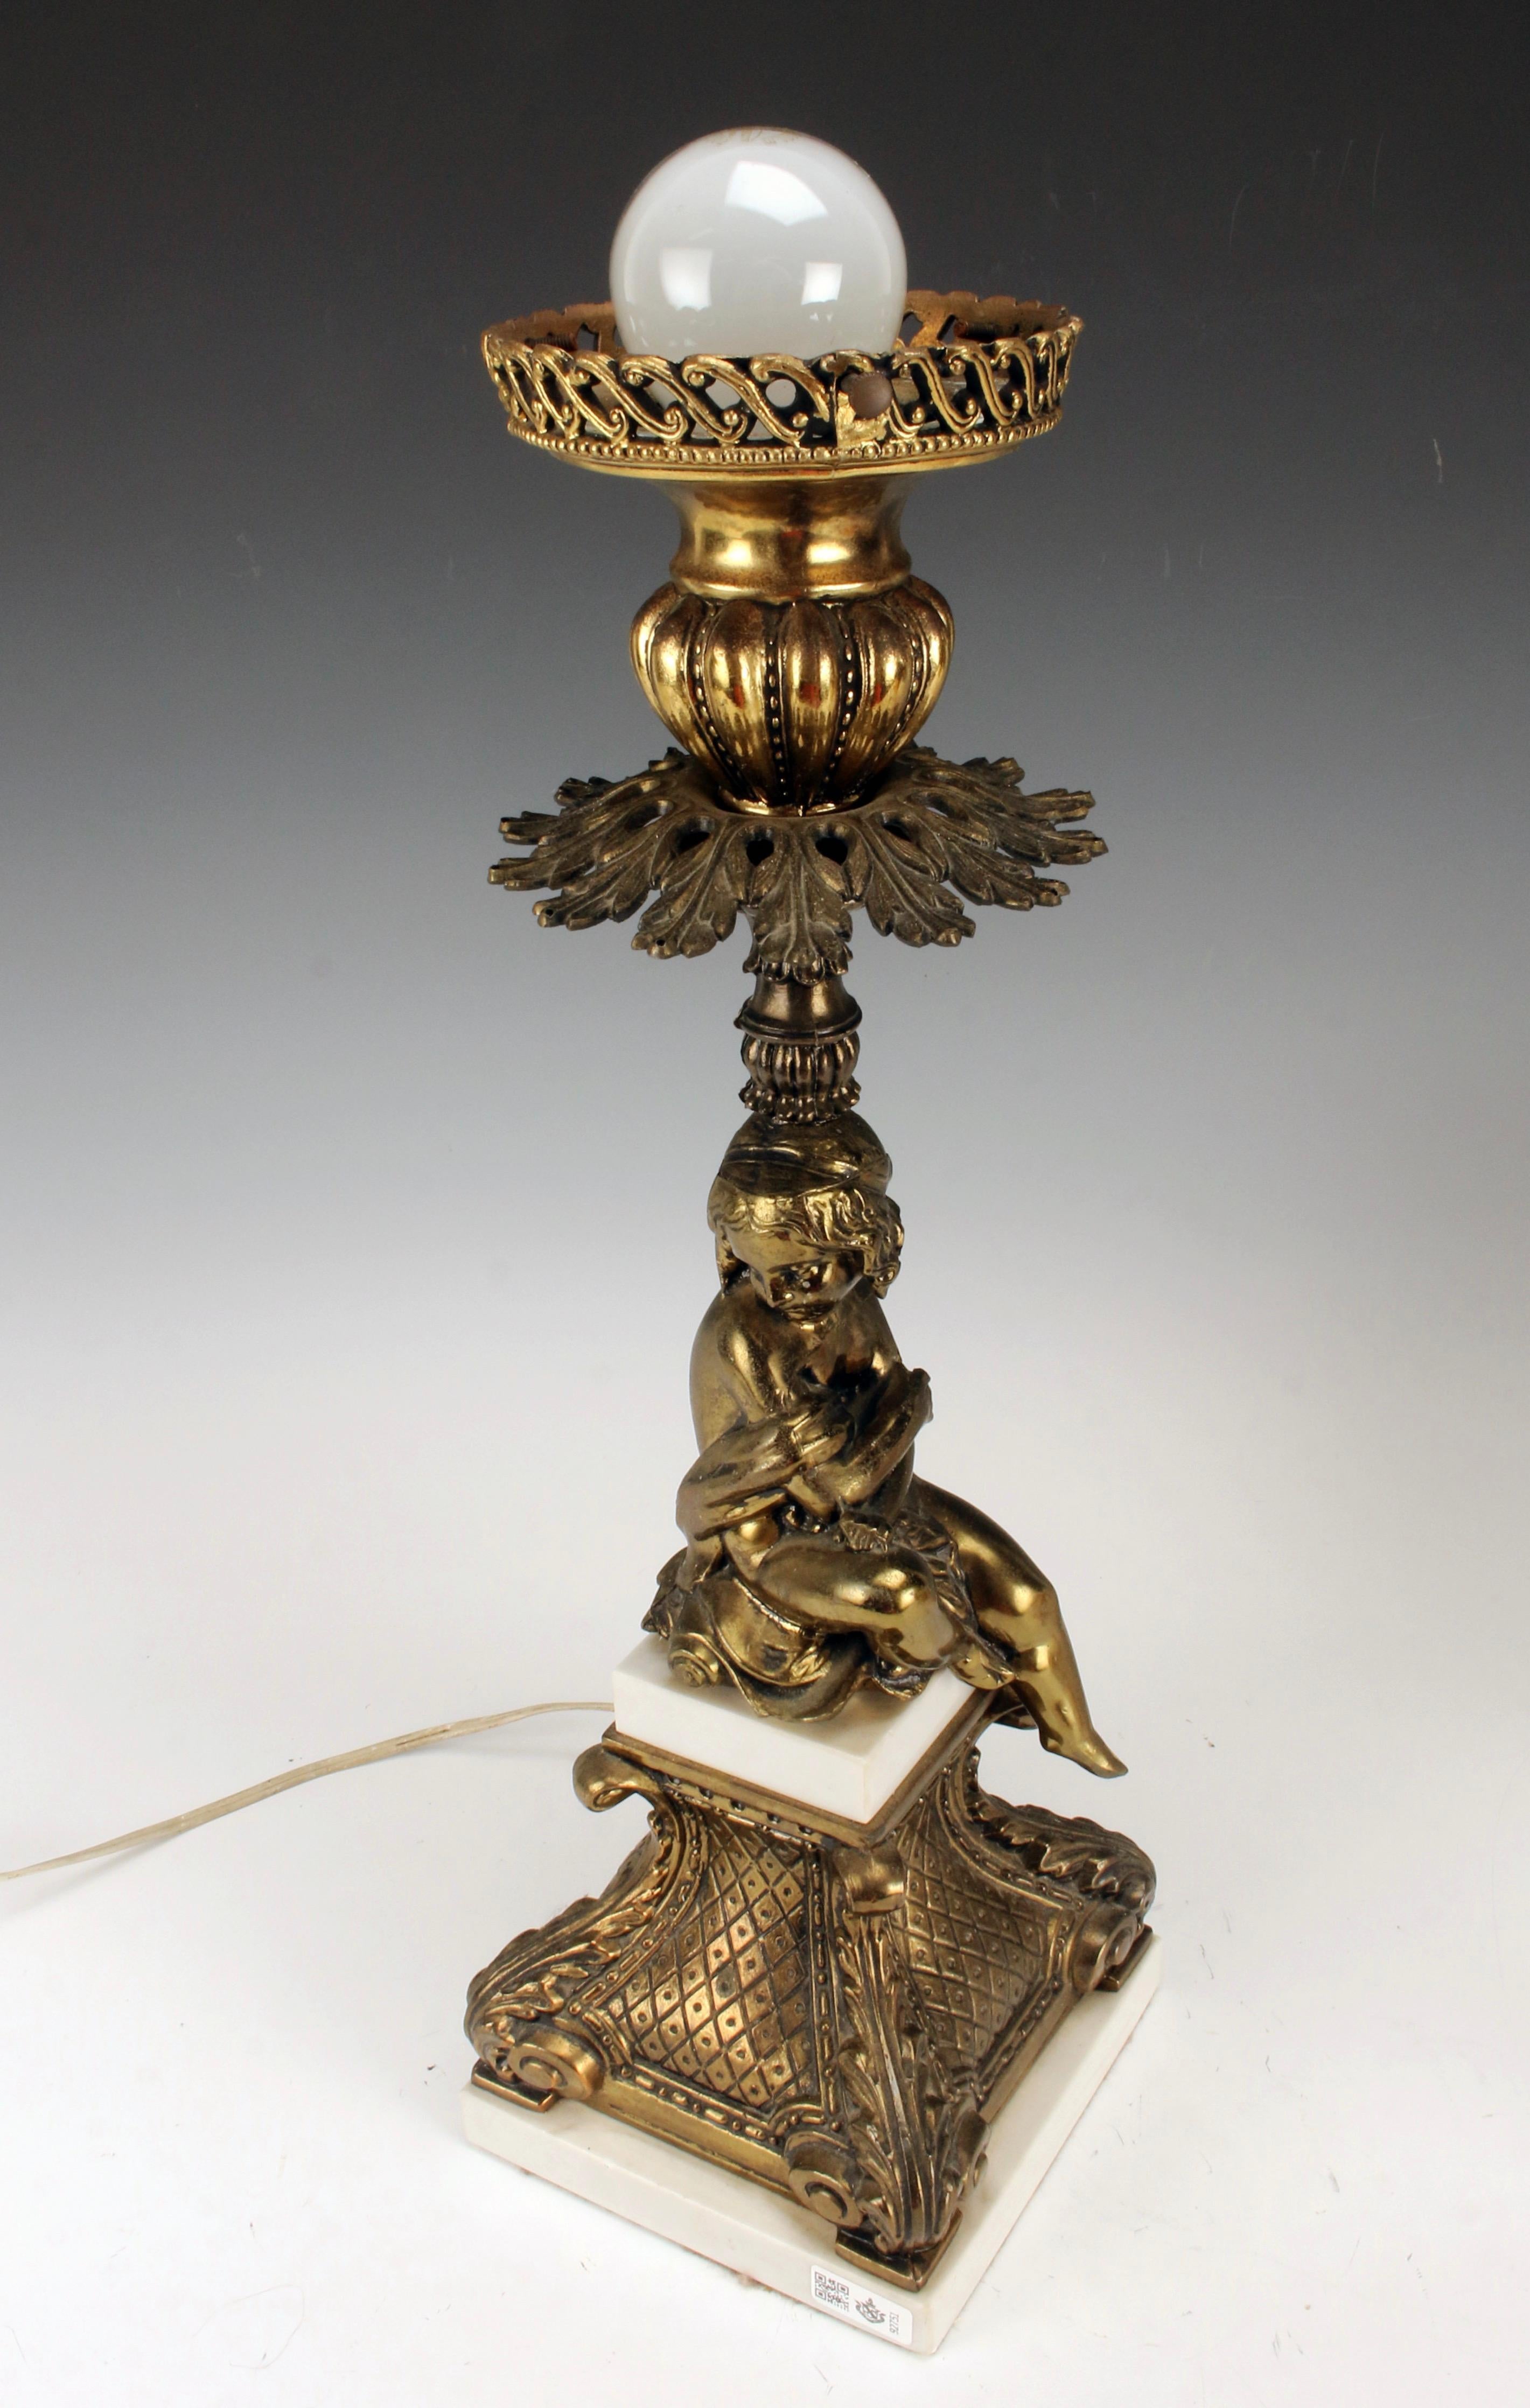 Ornately decorated lamp base with a seated female on a pedestal. Street lamp style frosted glass globe with crackle finish.





